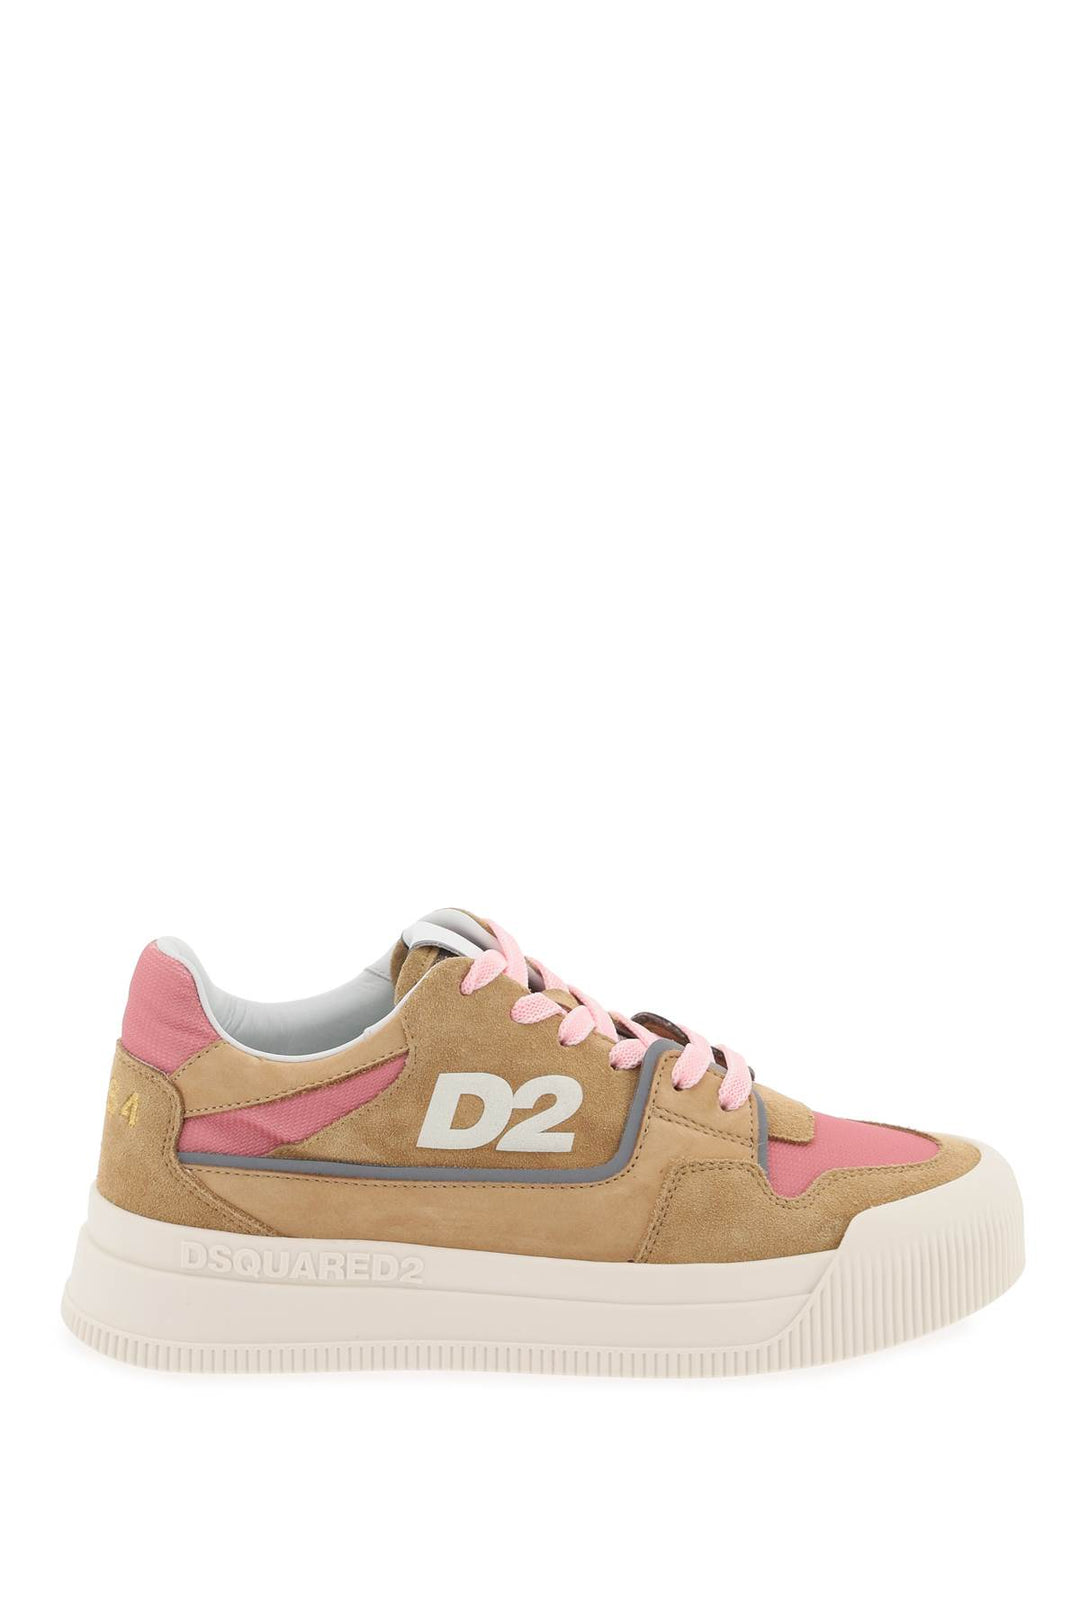 Dsquared2 Suede New Jersey Sneakers In Leather   Beige